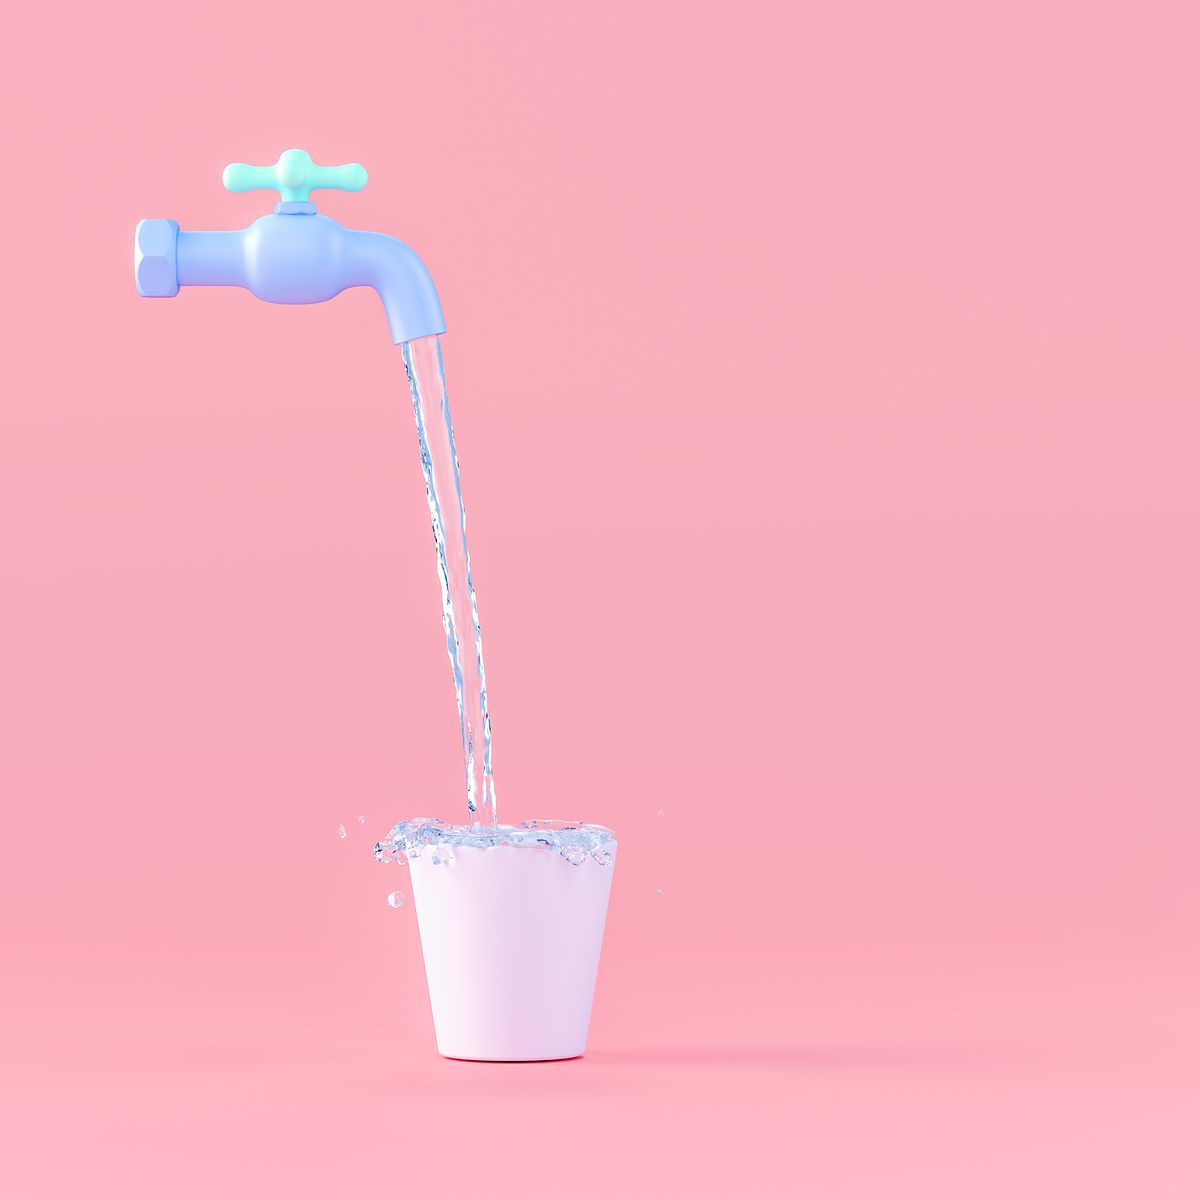 water falling in bucket from tap against pink background